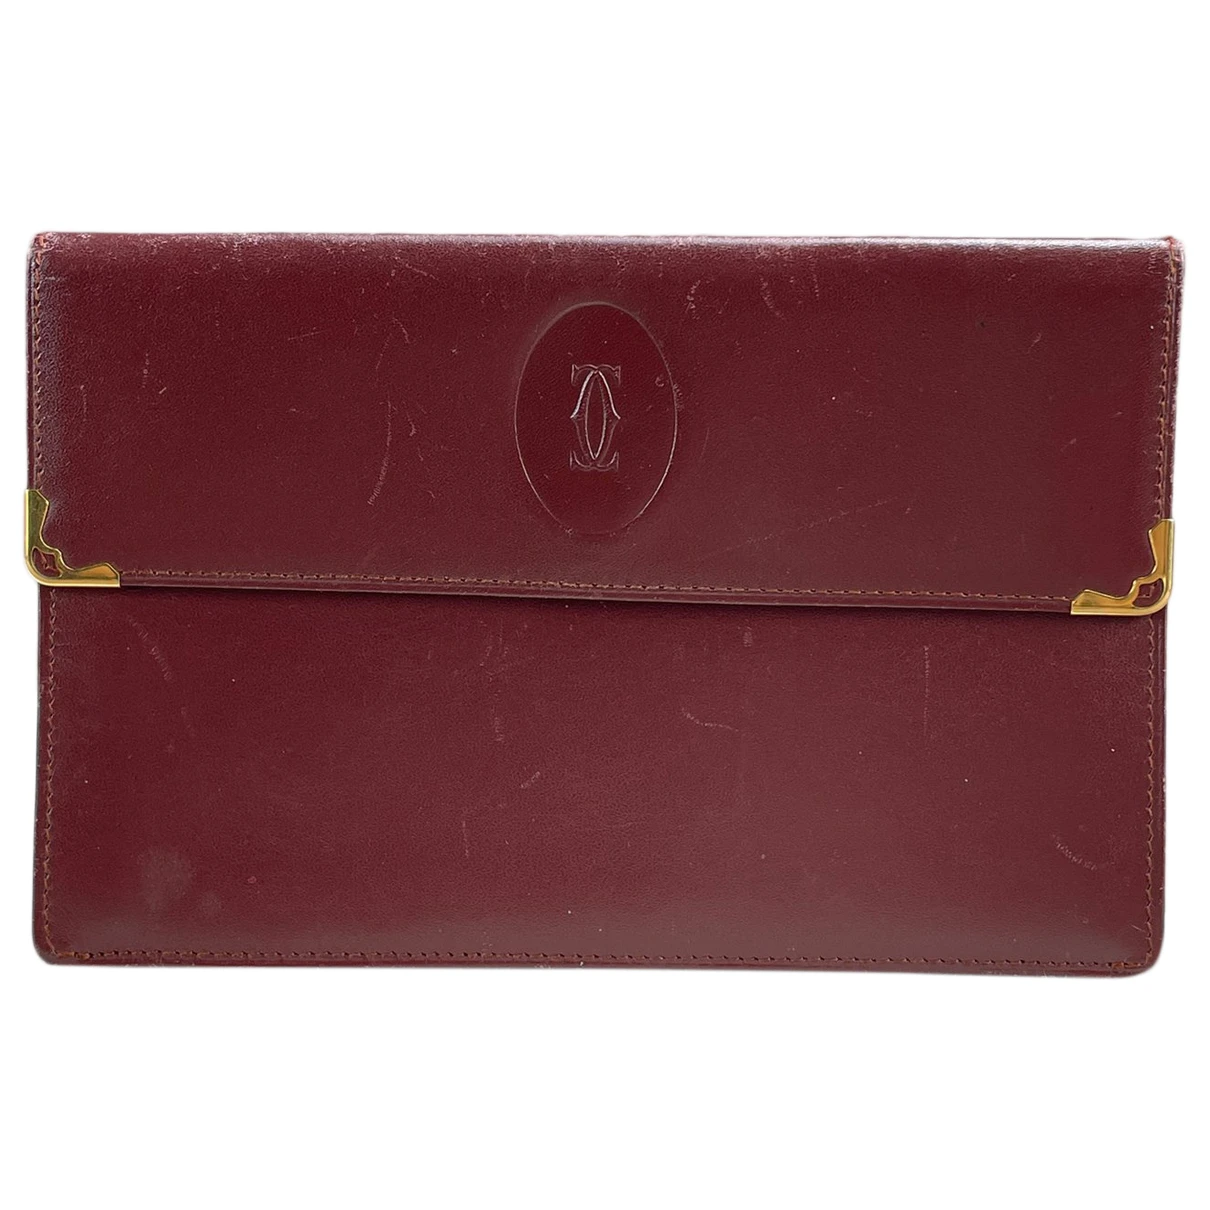 Pre-owned Cartier Patent Leather Small Bag In Burgundy